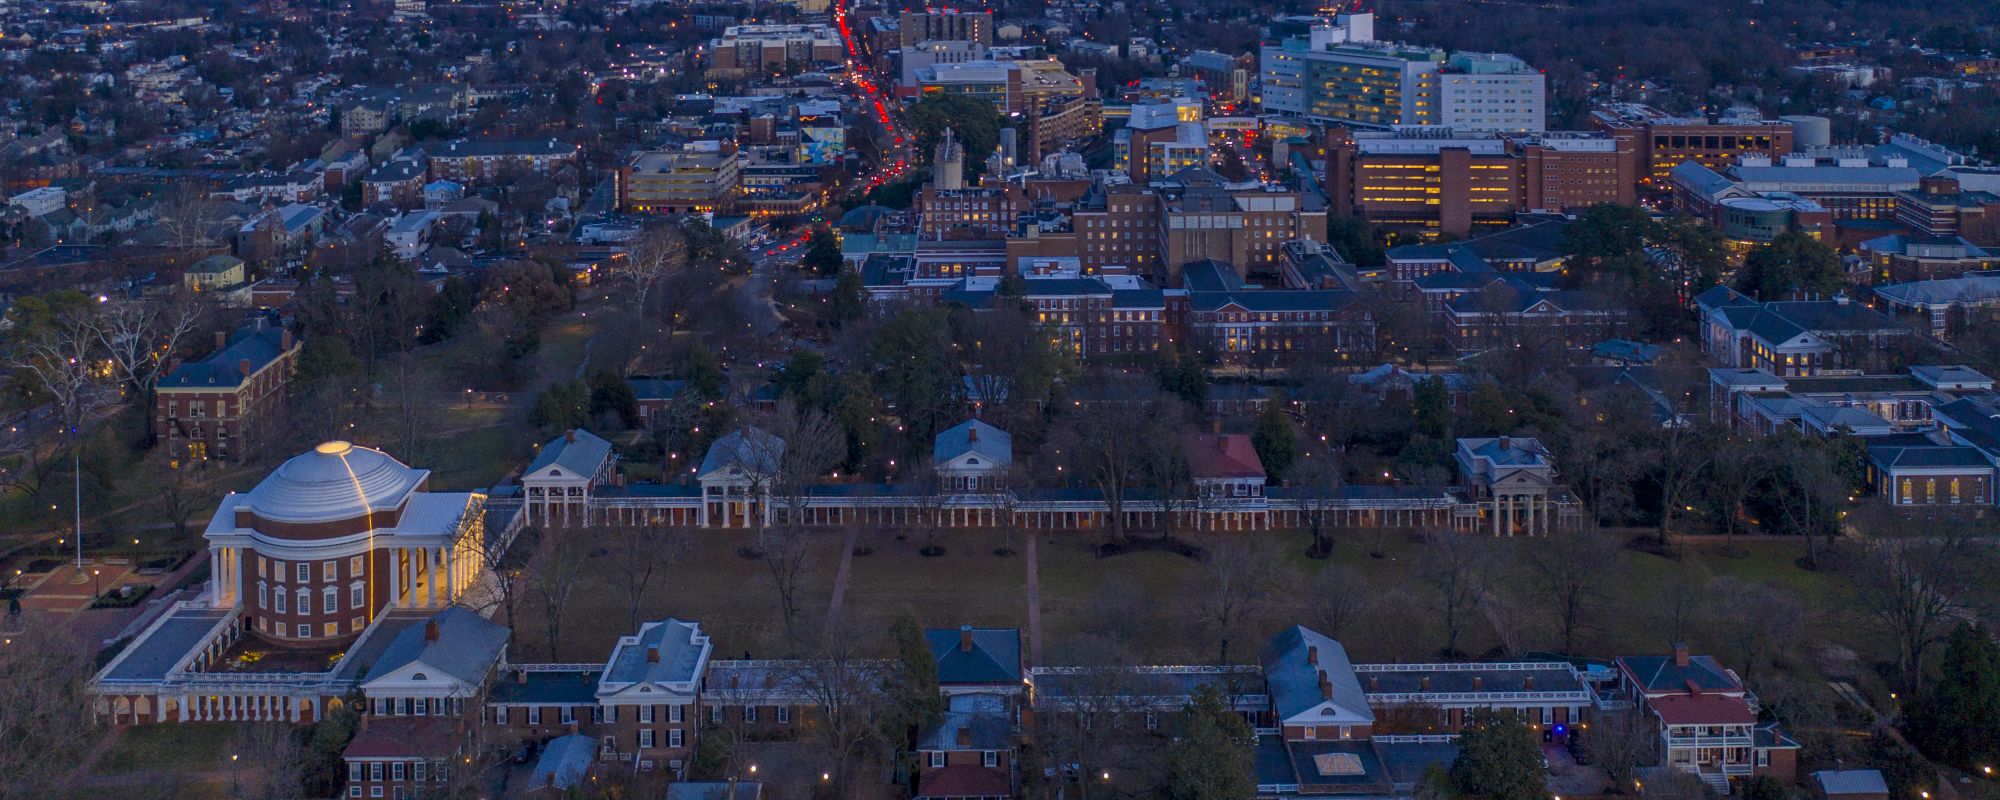 Aerial photo of the UVA Lawn and Charlottesville at dusk